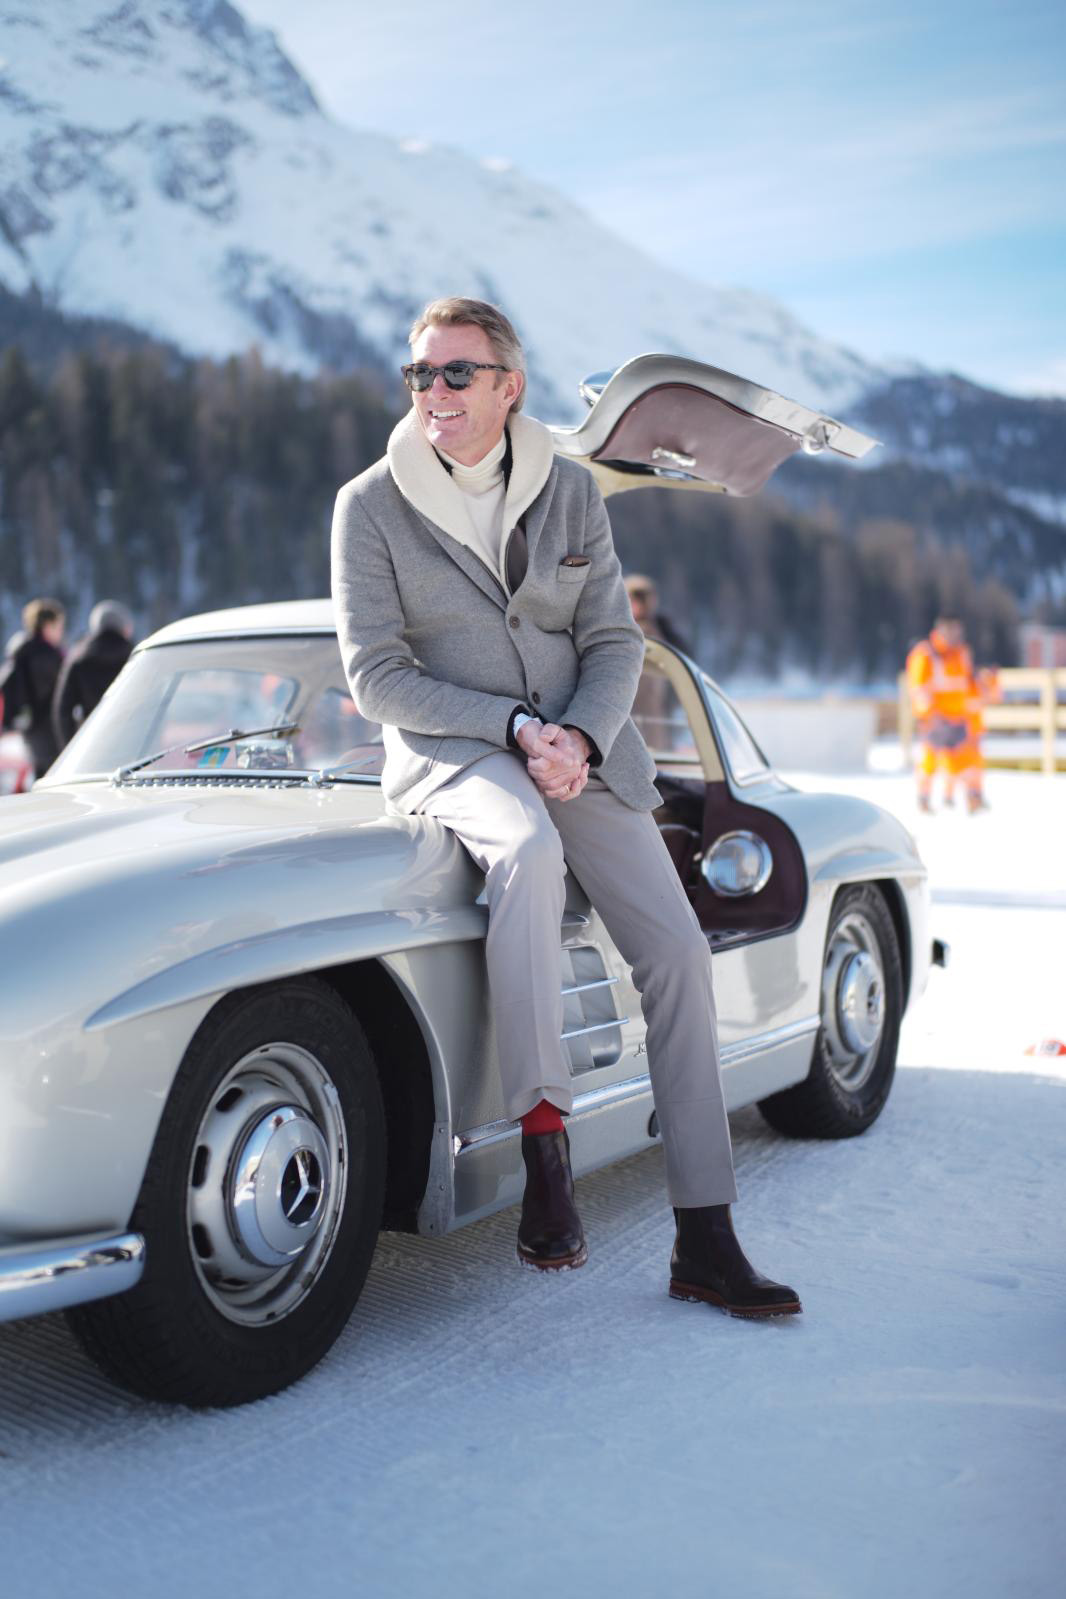 A legendary car: Simon Kidston and his Mercedes 300 SL Gullwing from 1955 during the concours d'élégance The Ice at St-Moritz in 2020. Courtesy Kidston SA